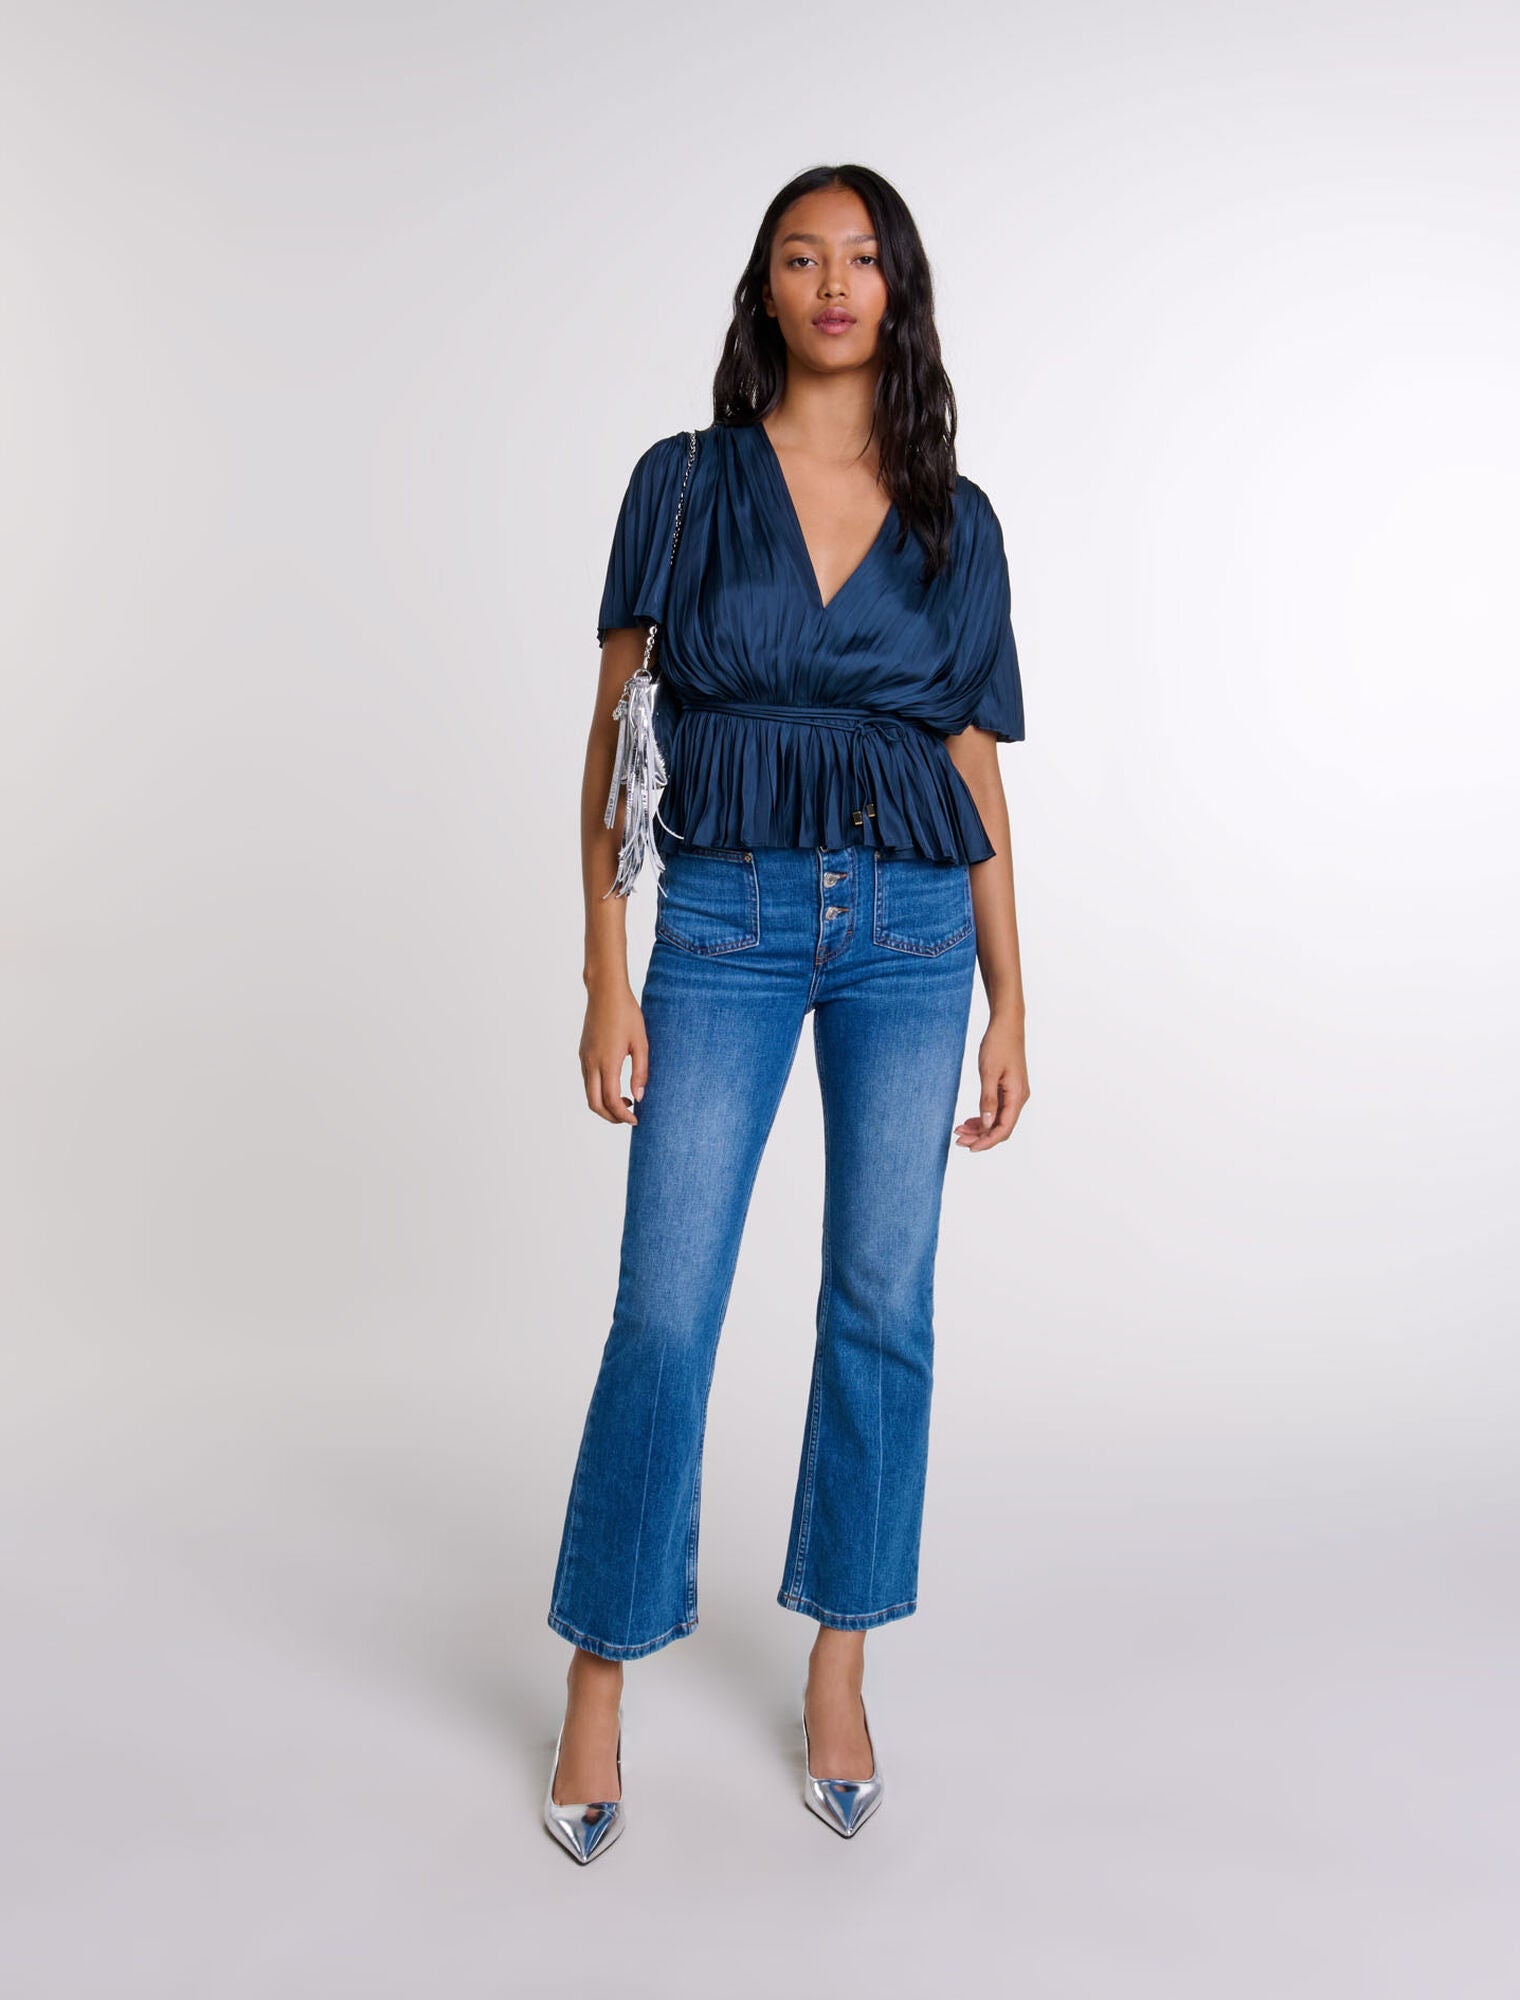 Navy-featured-Pleated short-sleeved top